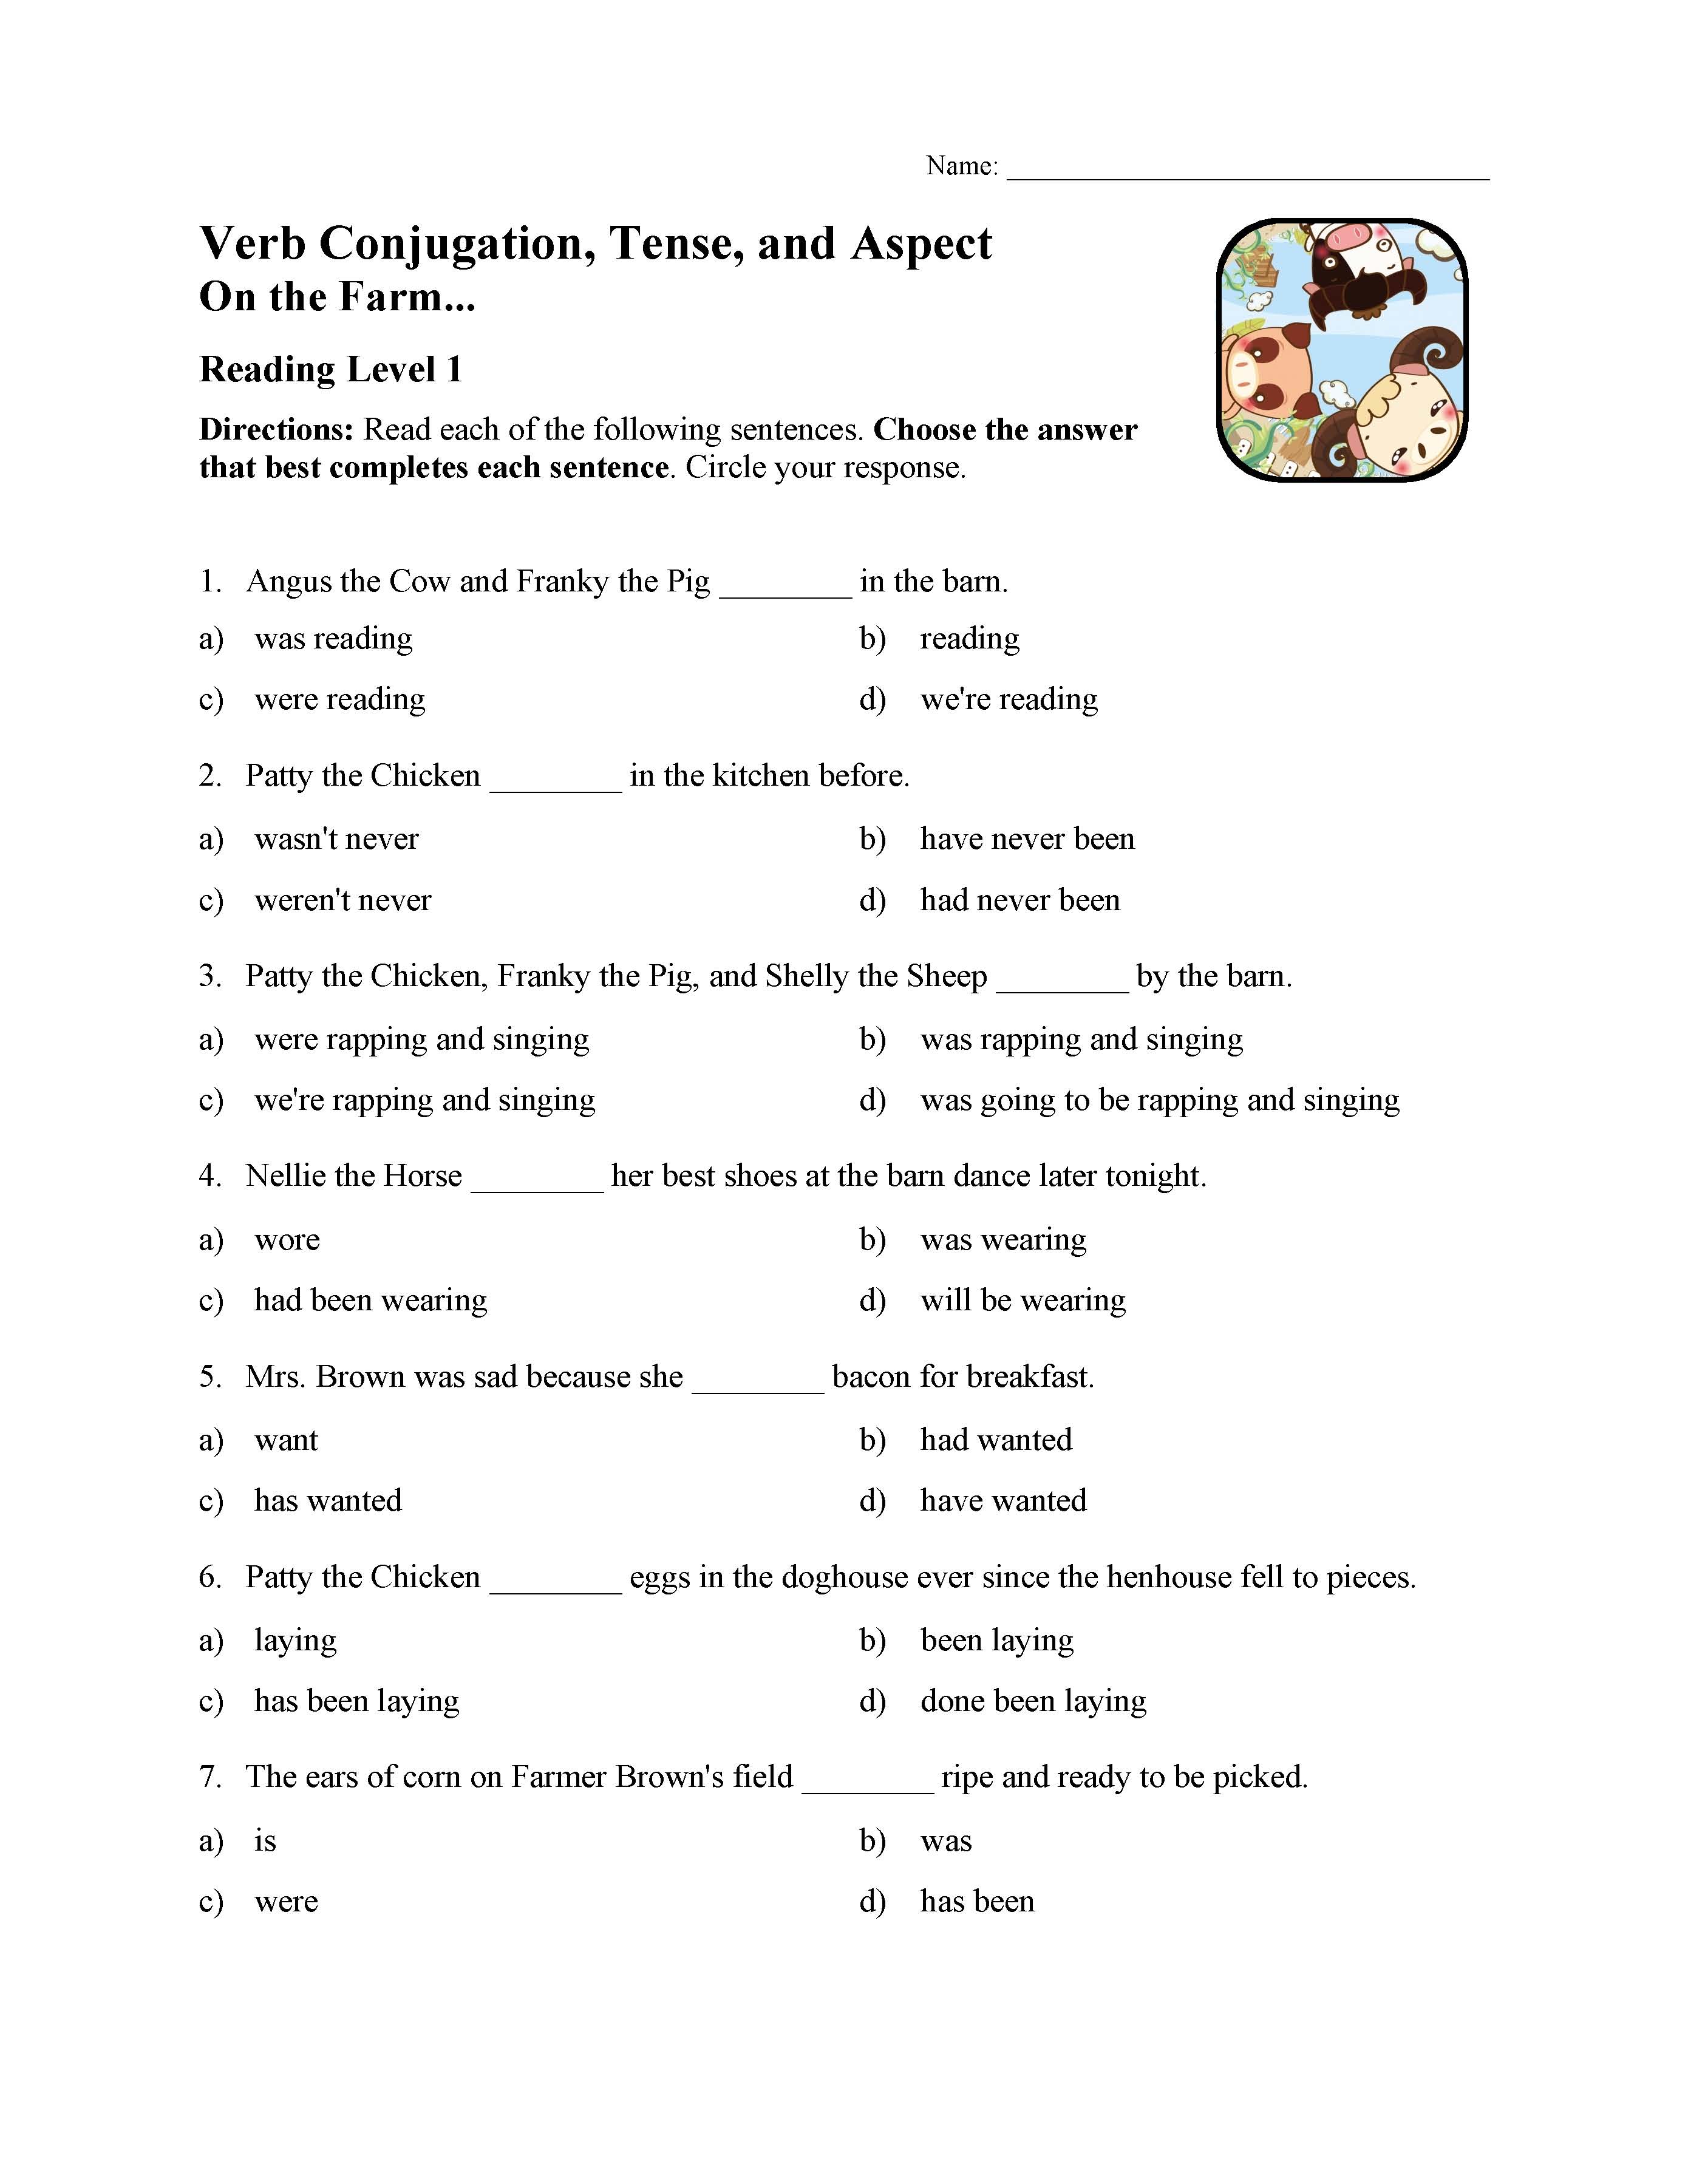 Grade 5 Verbs Worksheets K5 Learning Past Present And Future Perfect Tense Worksheets K5